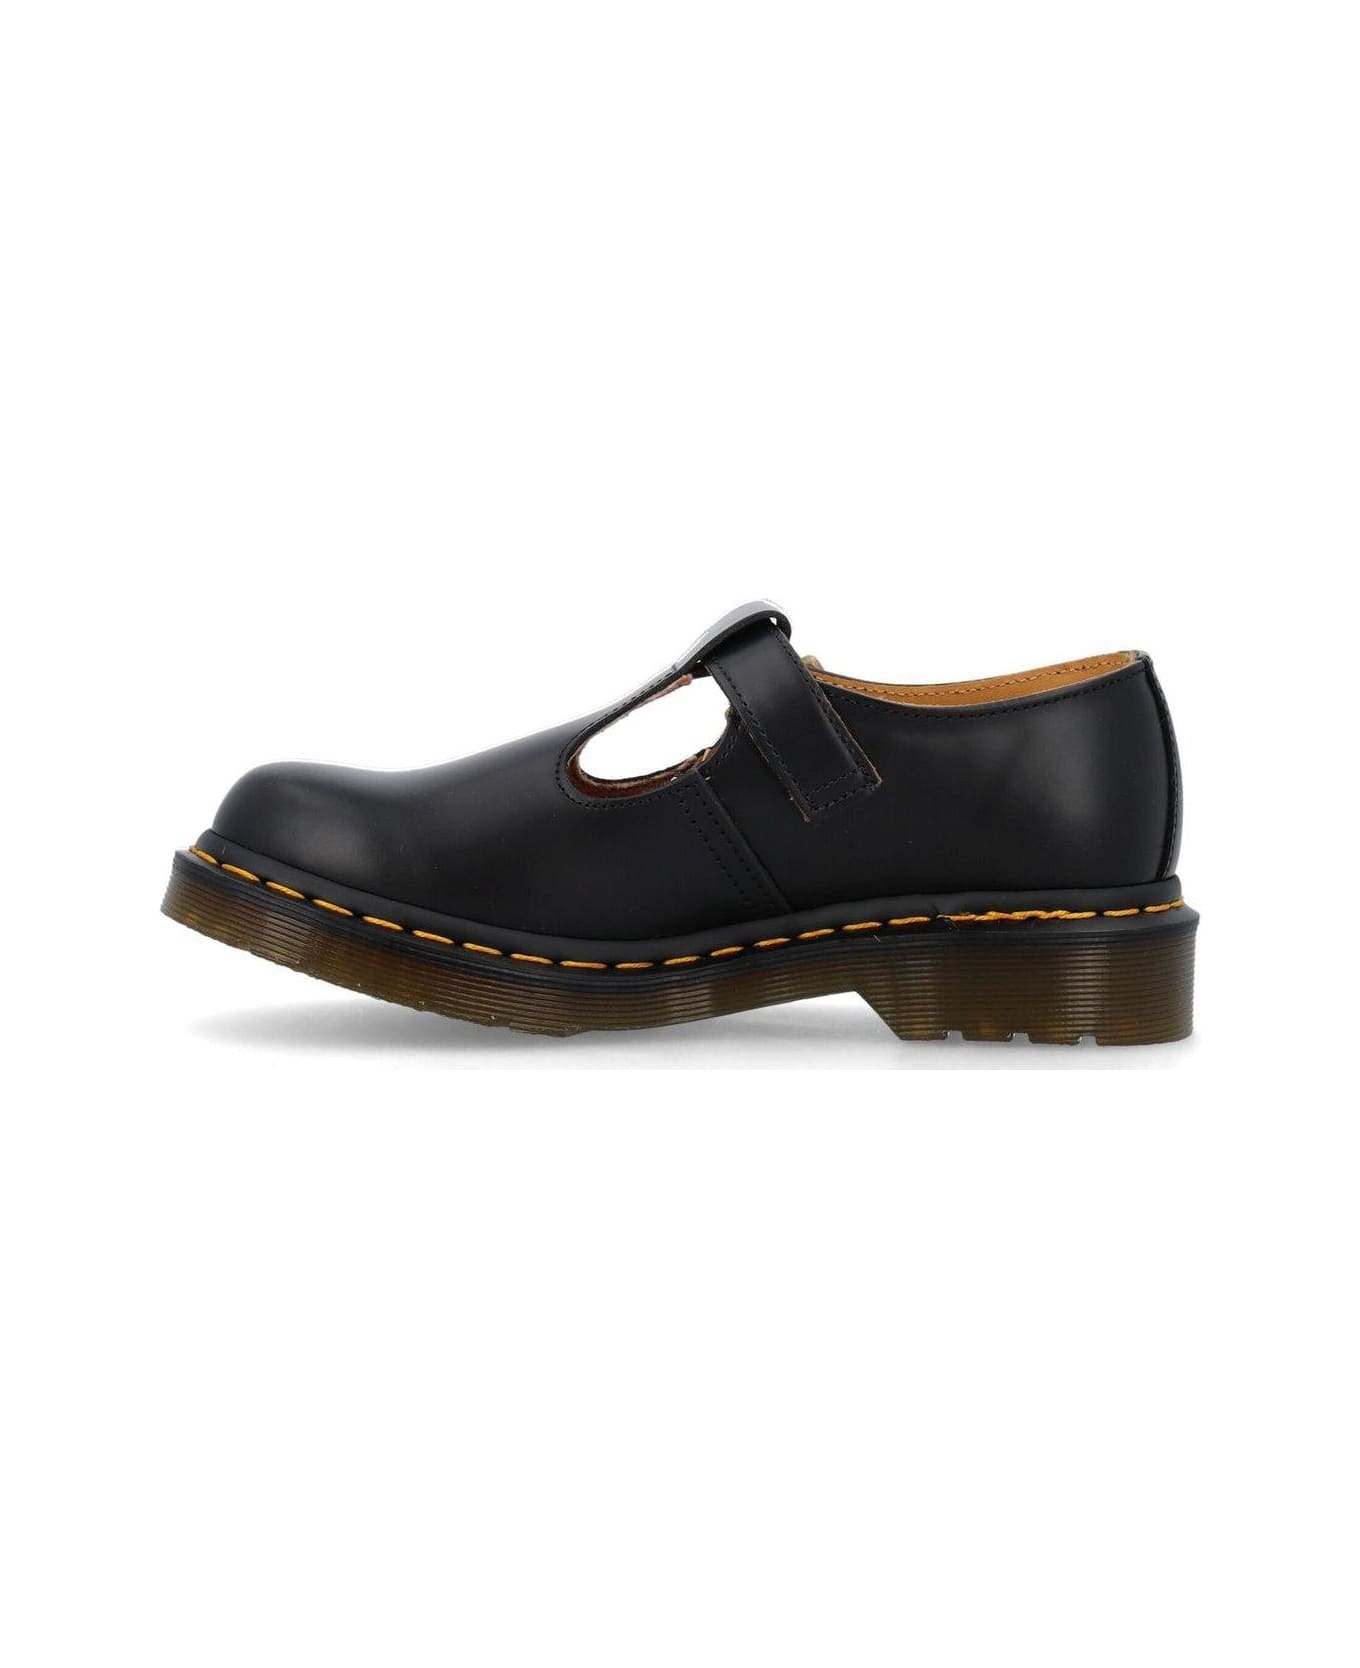 Dr. Martens Polley Mary Jane Flat Shoes - BLACK フラットシューズ